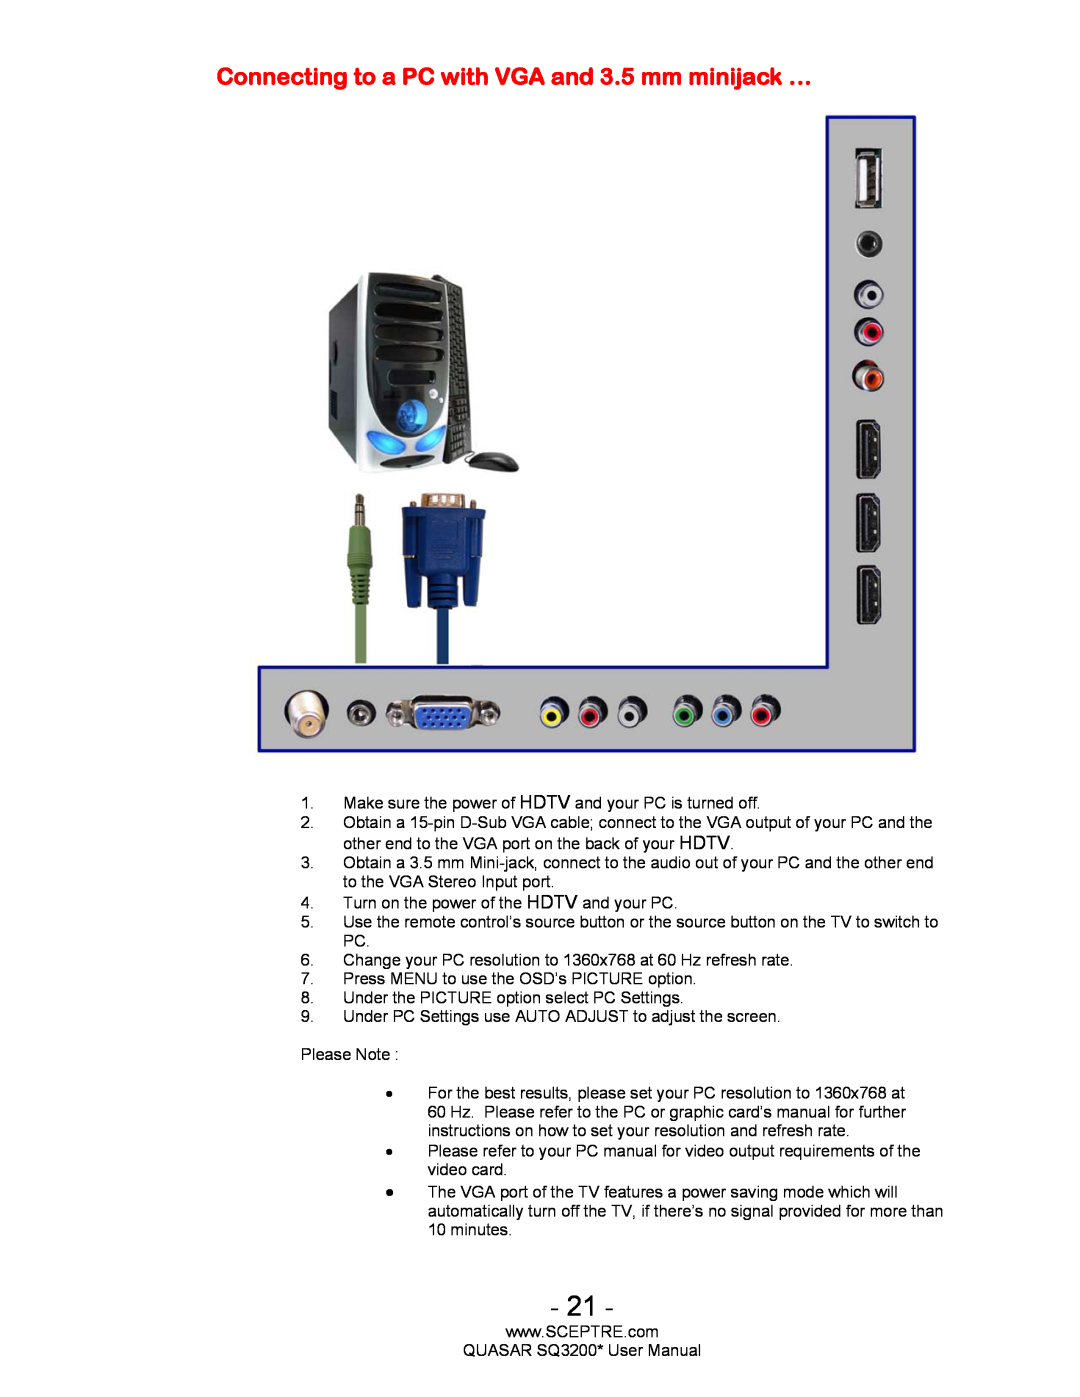 Sceptre Technologies SQ3200, HDTV user manual Connecting to a PC with VGA and 3.5 mm minijack … 